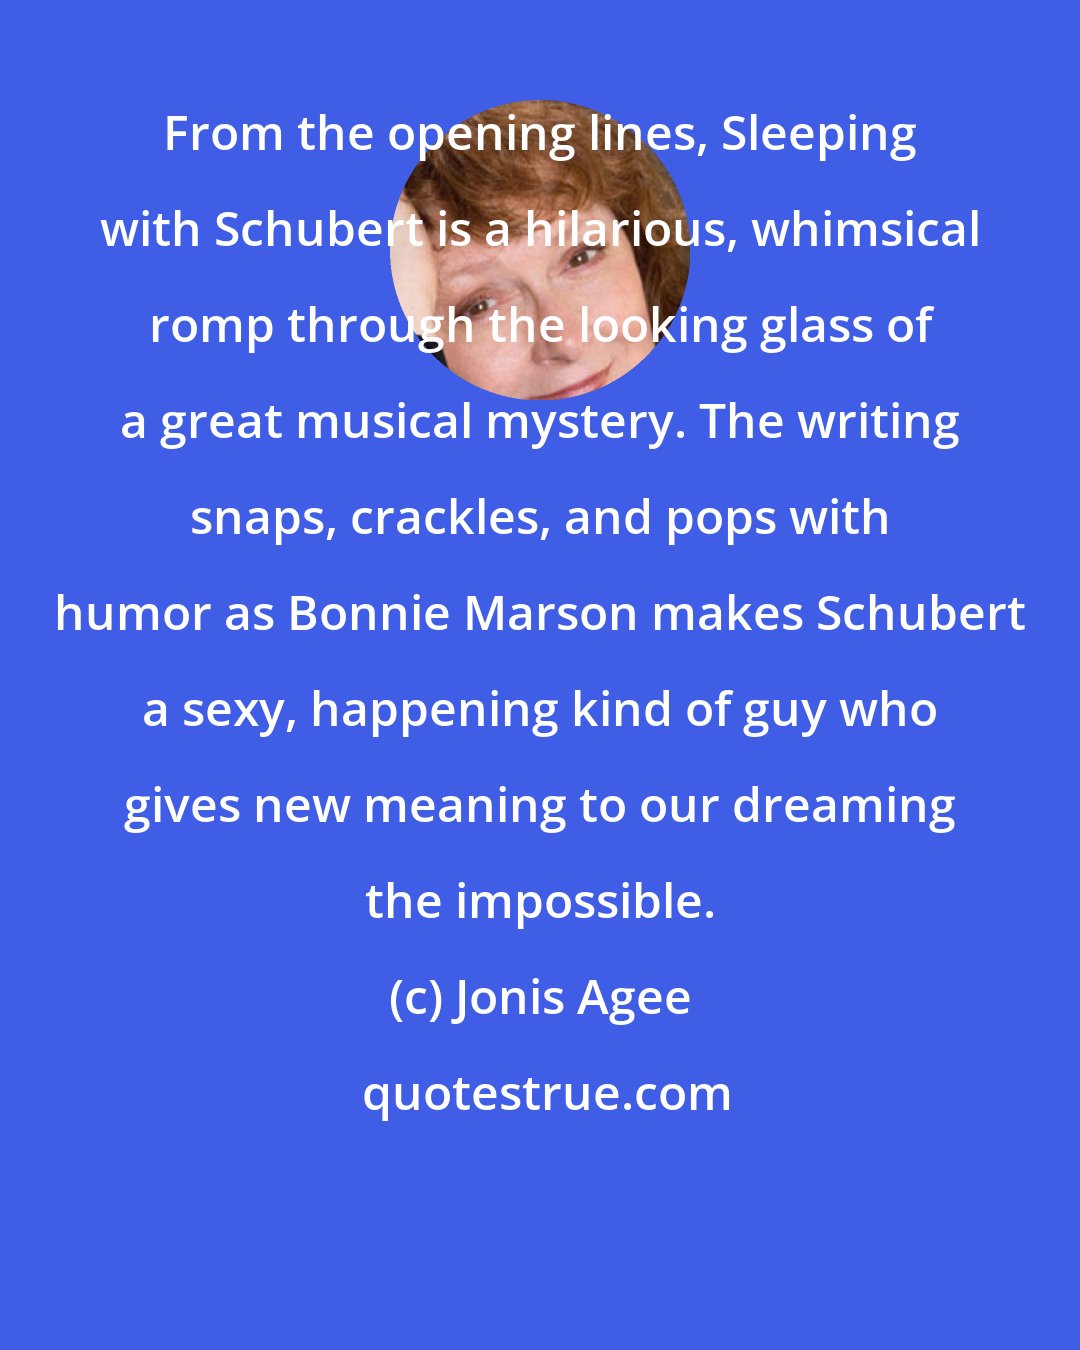 Jonis Agee: From the opening lines, Sleeping with Schubert is a hilarious, whimsical romp through the looking glass of a great musical mystery. The writing snaps, crackles, and pops with humor as Bonnie Marson makes Schubert a sexy, happening kind of guy who gives new meaning to our dreaming the impossible.